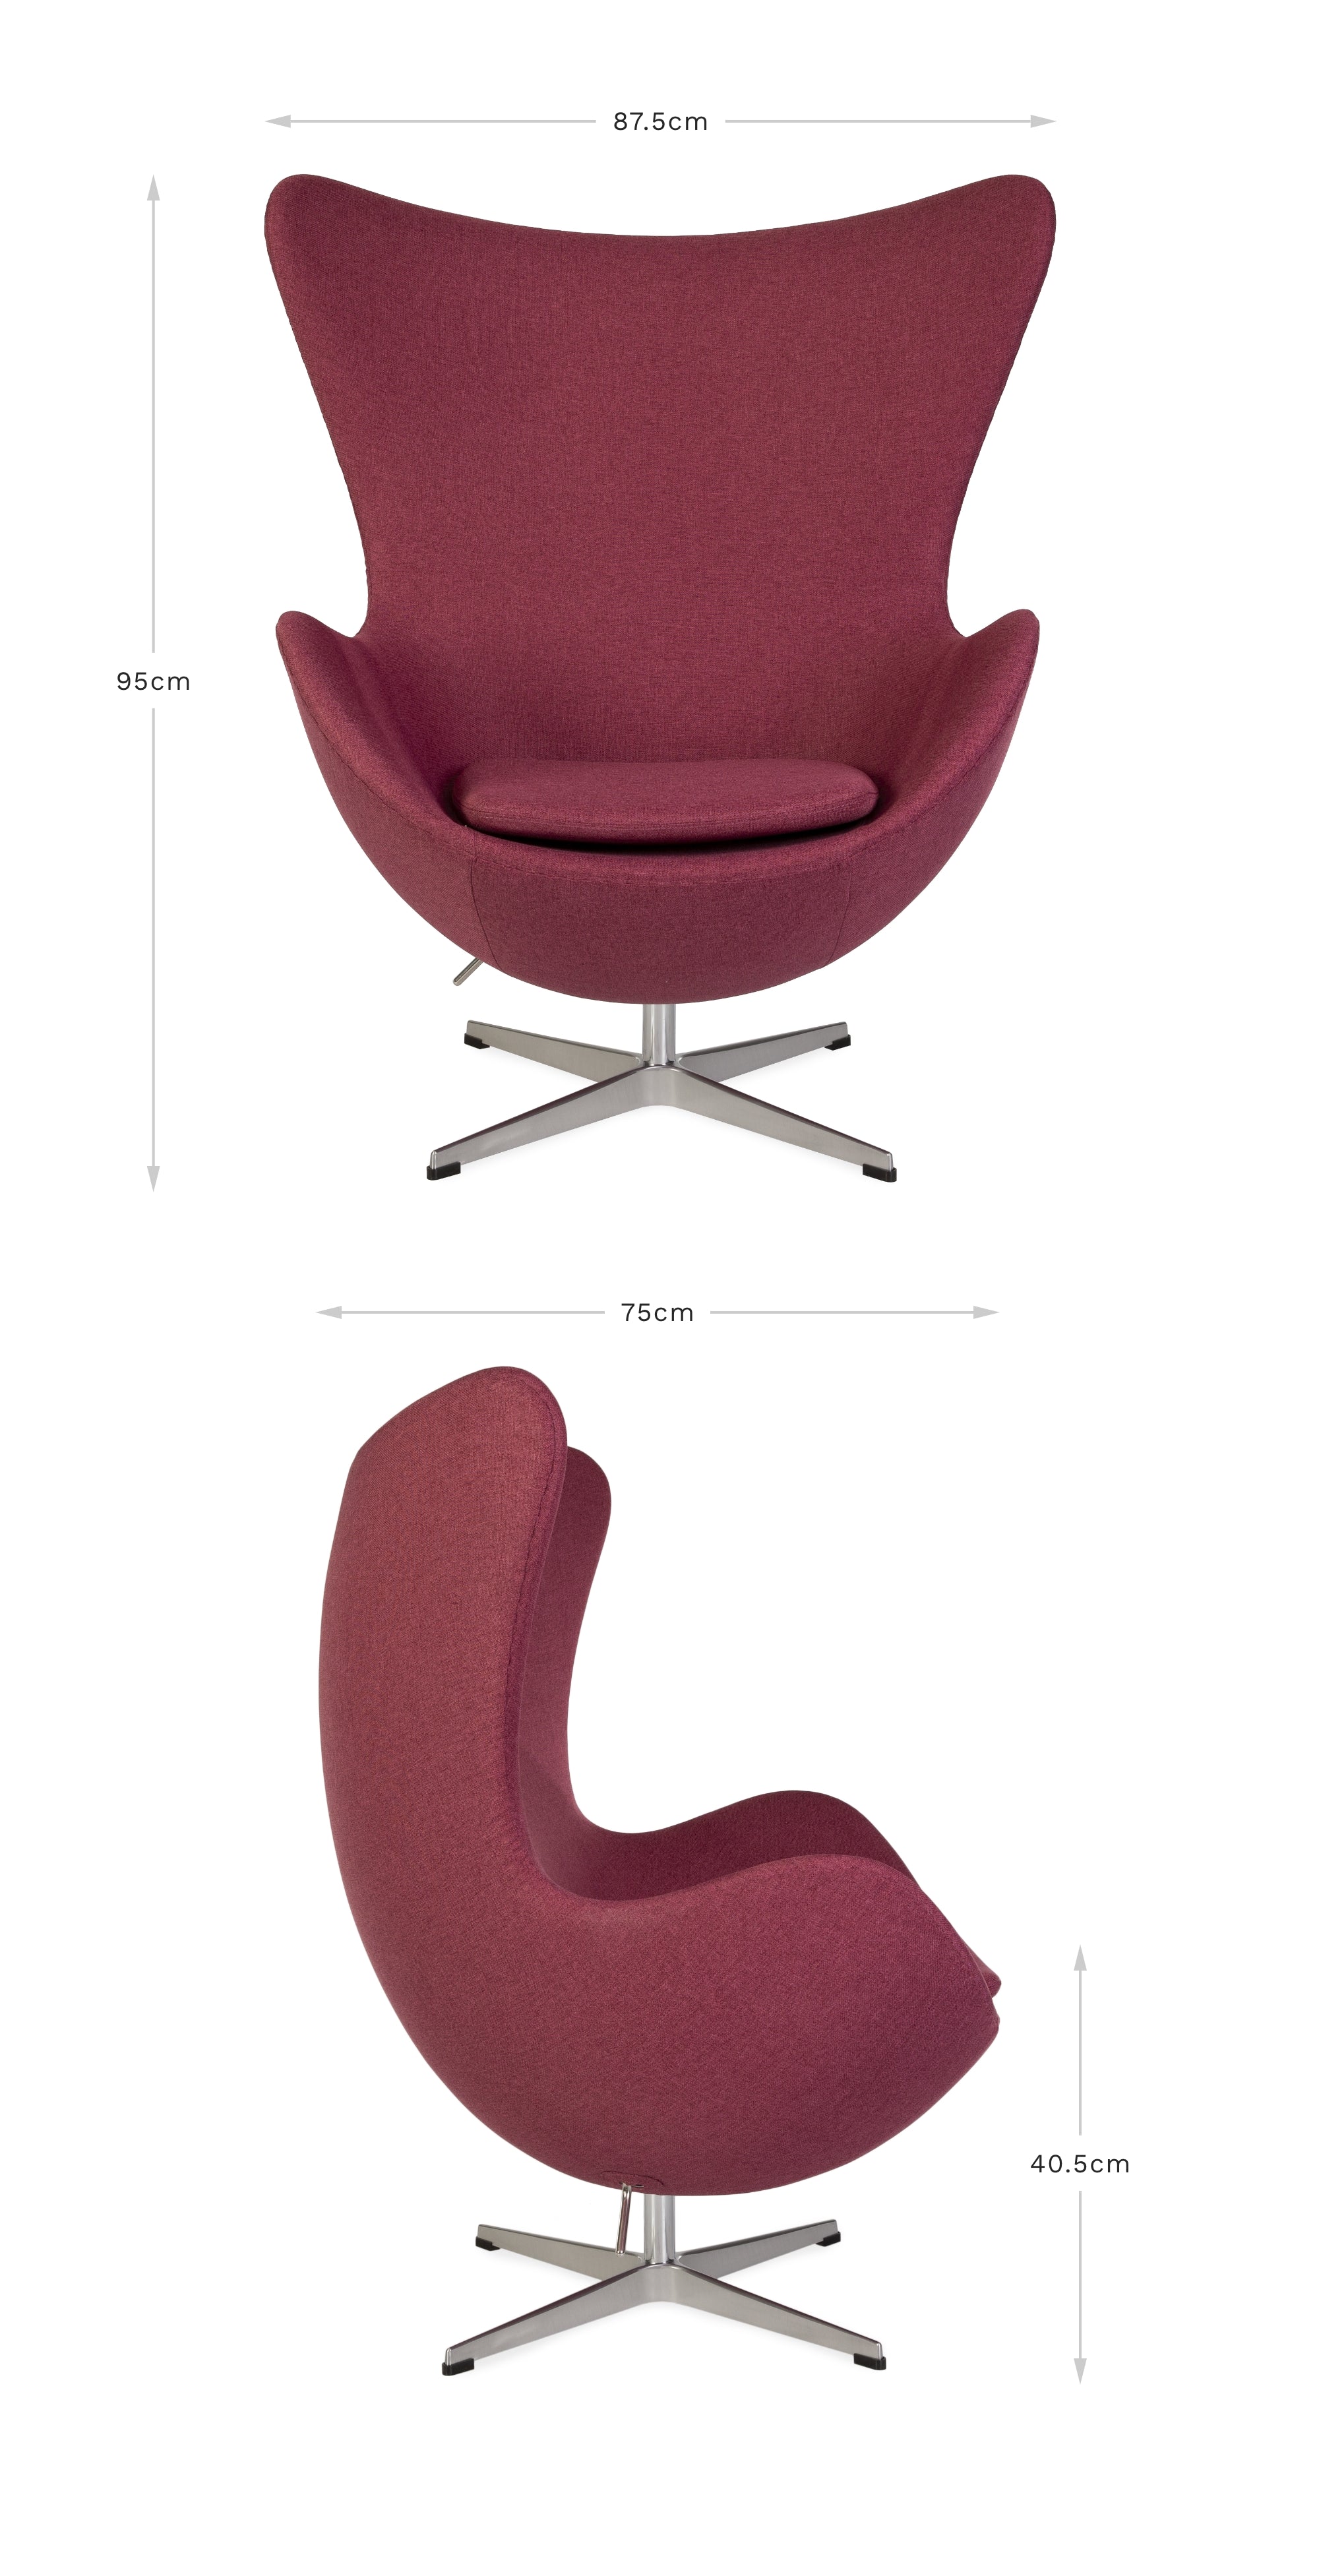 View of front and side of the pink fabric Jacobsen Egg Chair on a white background displaying the dimensions